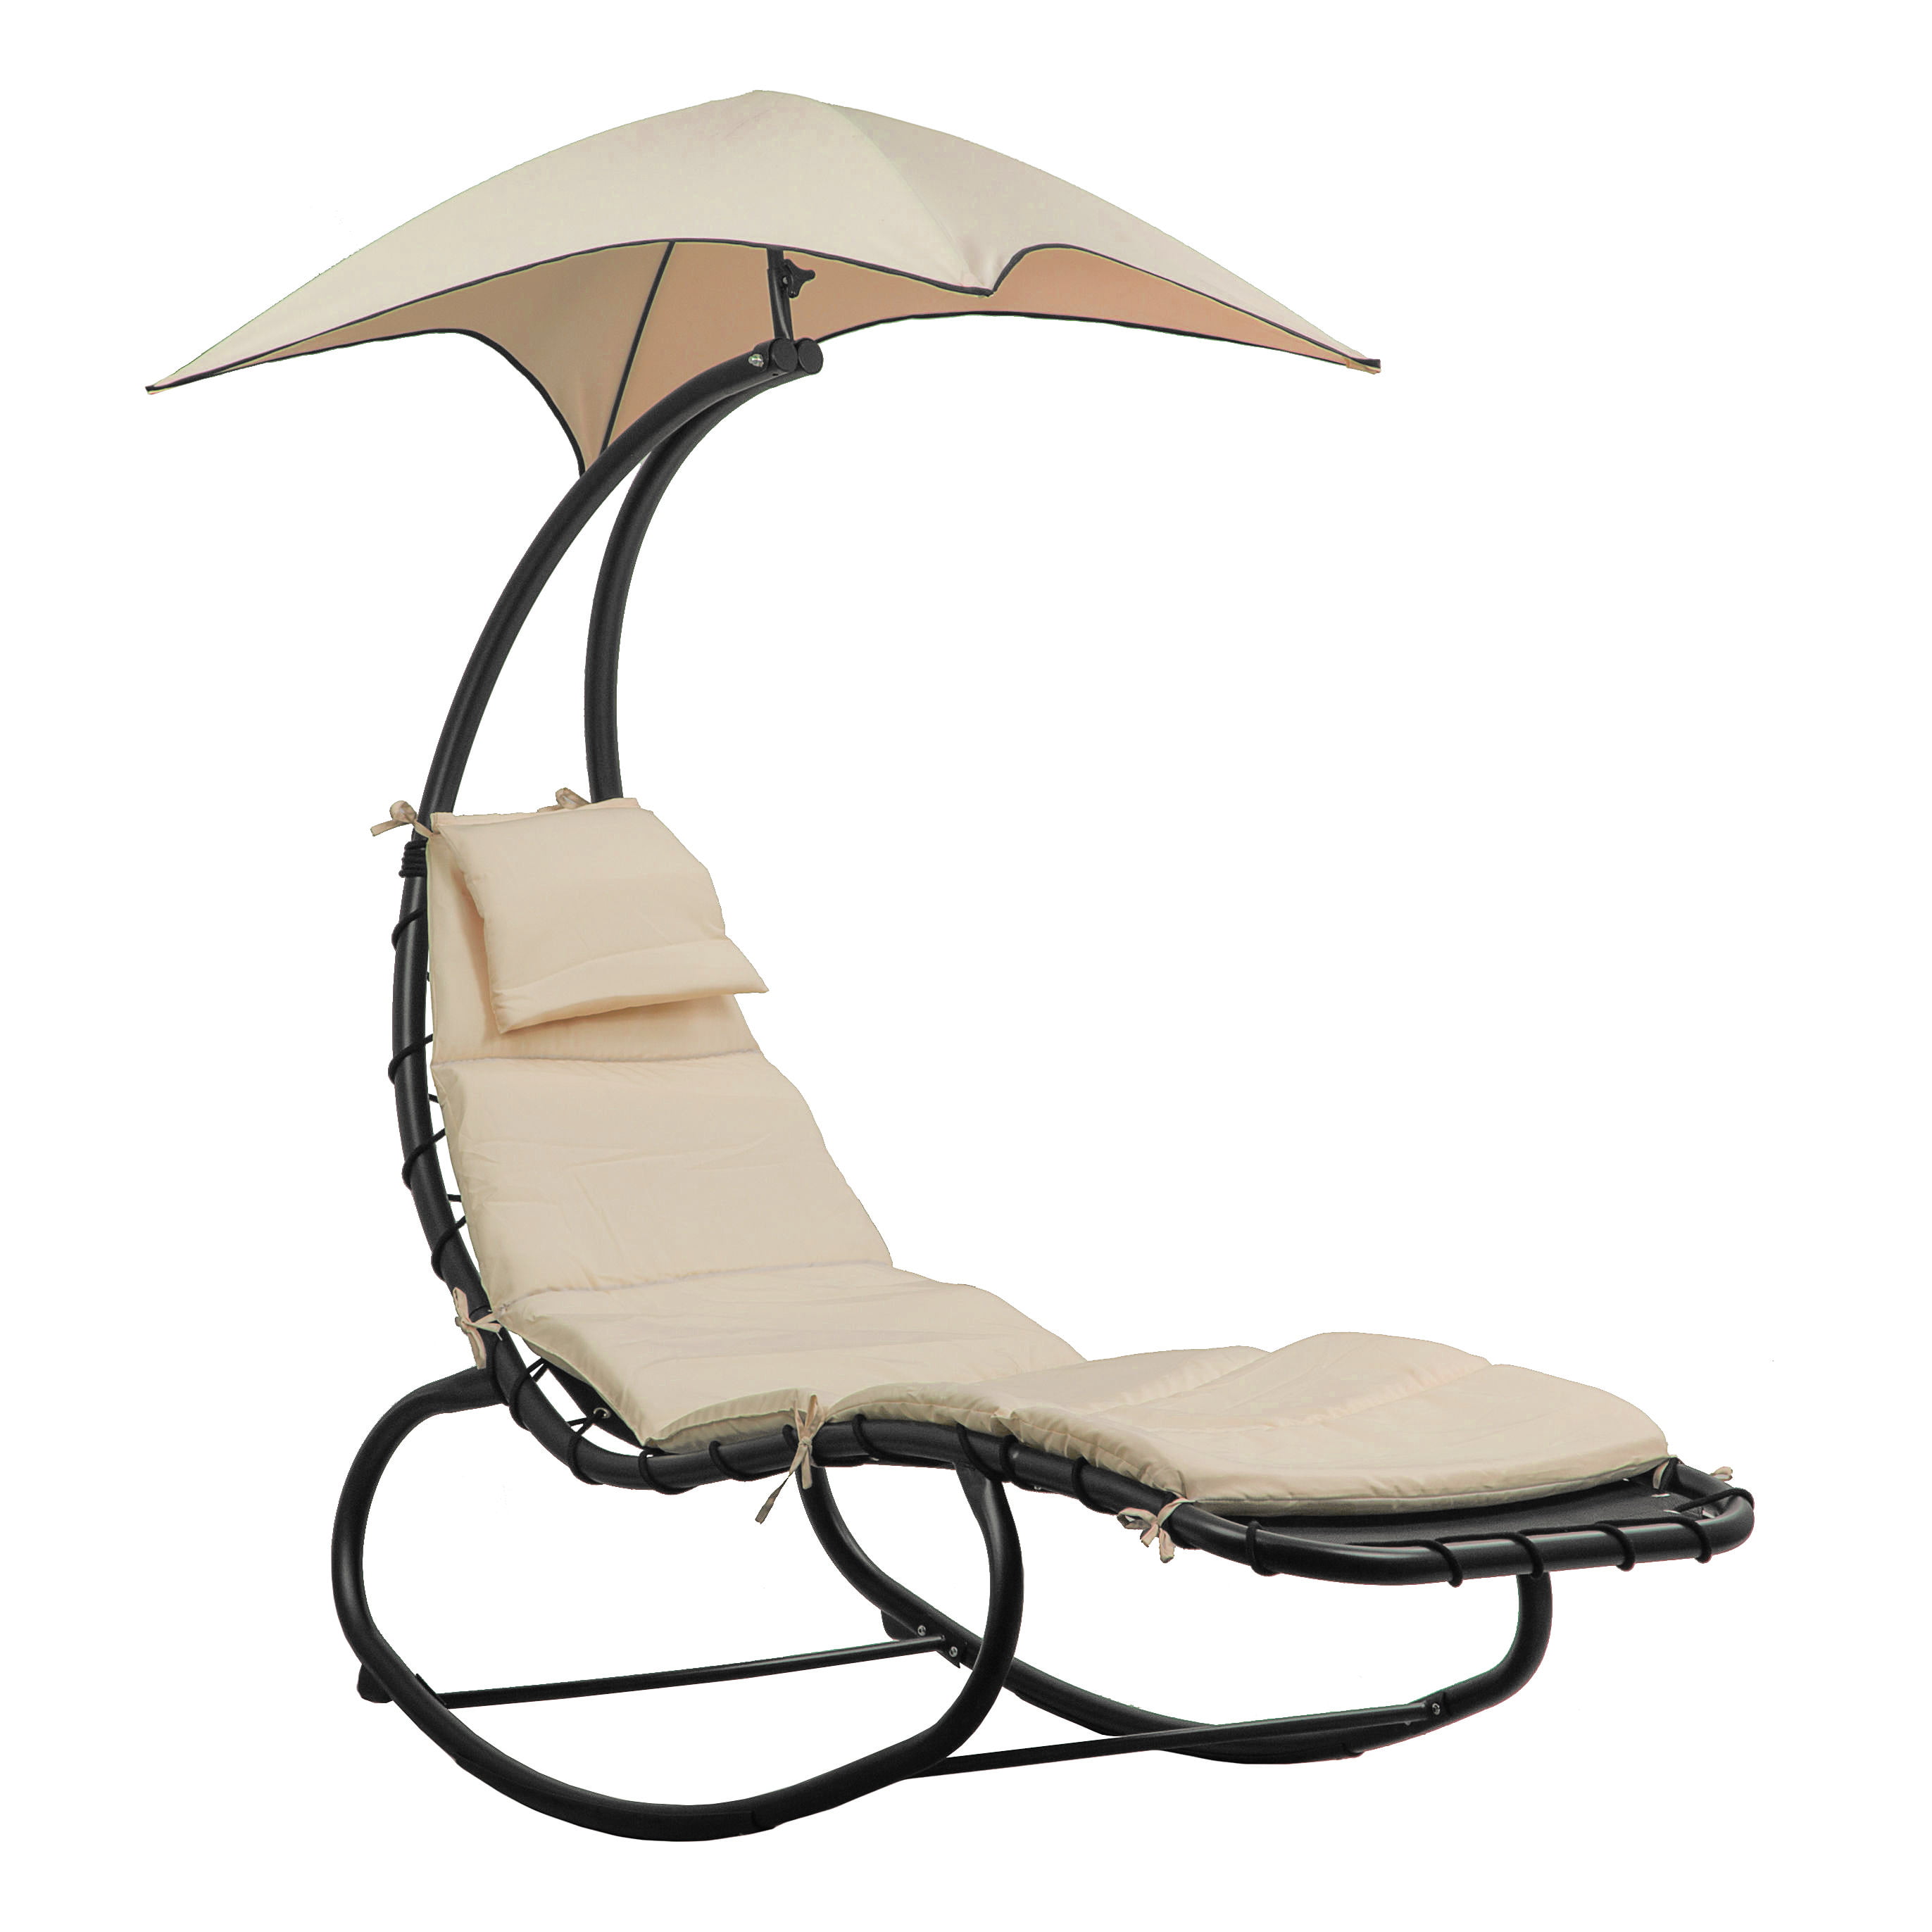 BELLEZE Outdoor Hanging Chaise Lounge Chair Swing Curved